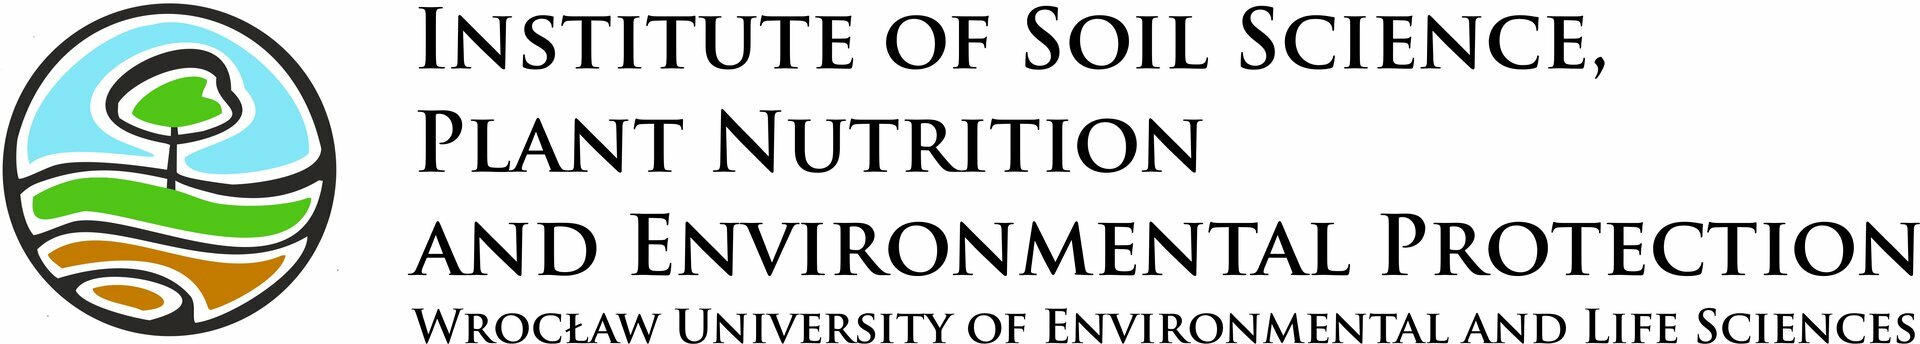 Institute of Soil Science, Plant Nutrition and Environmental Protection